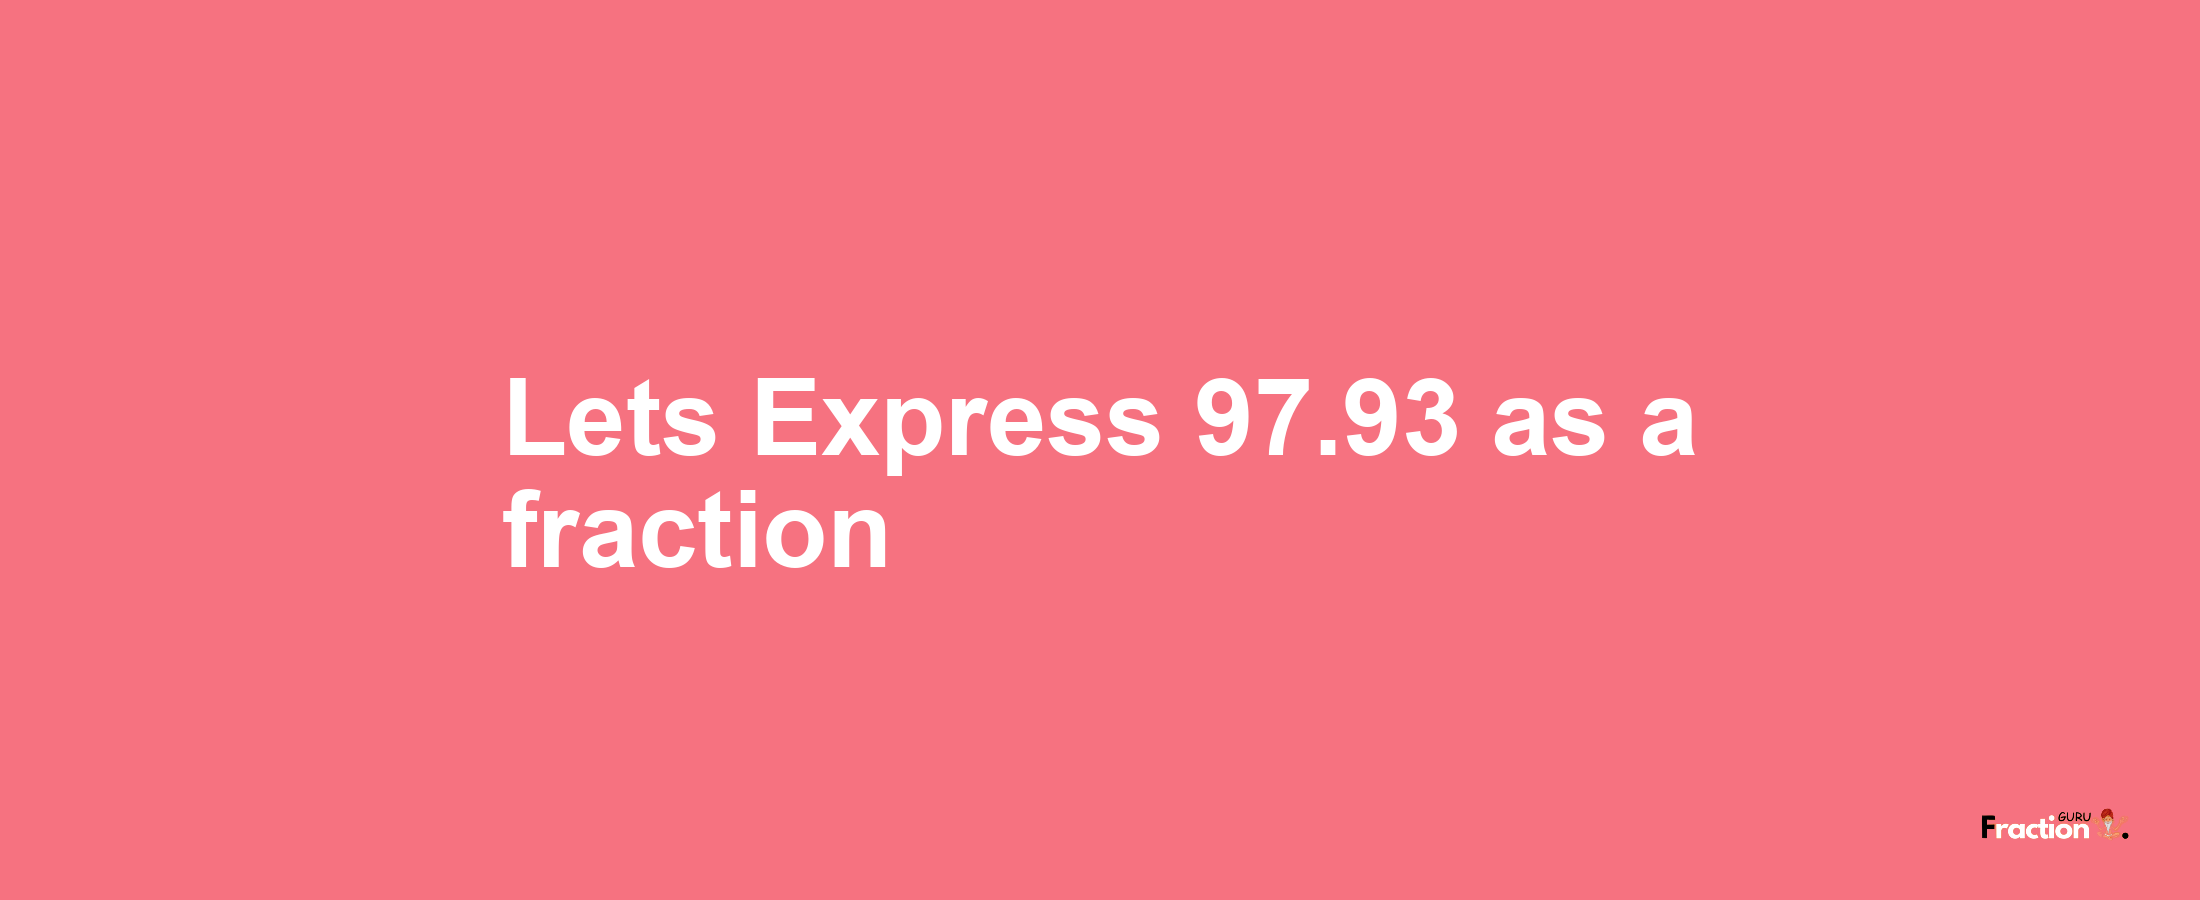 Lets Express 97.93 as afraction